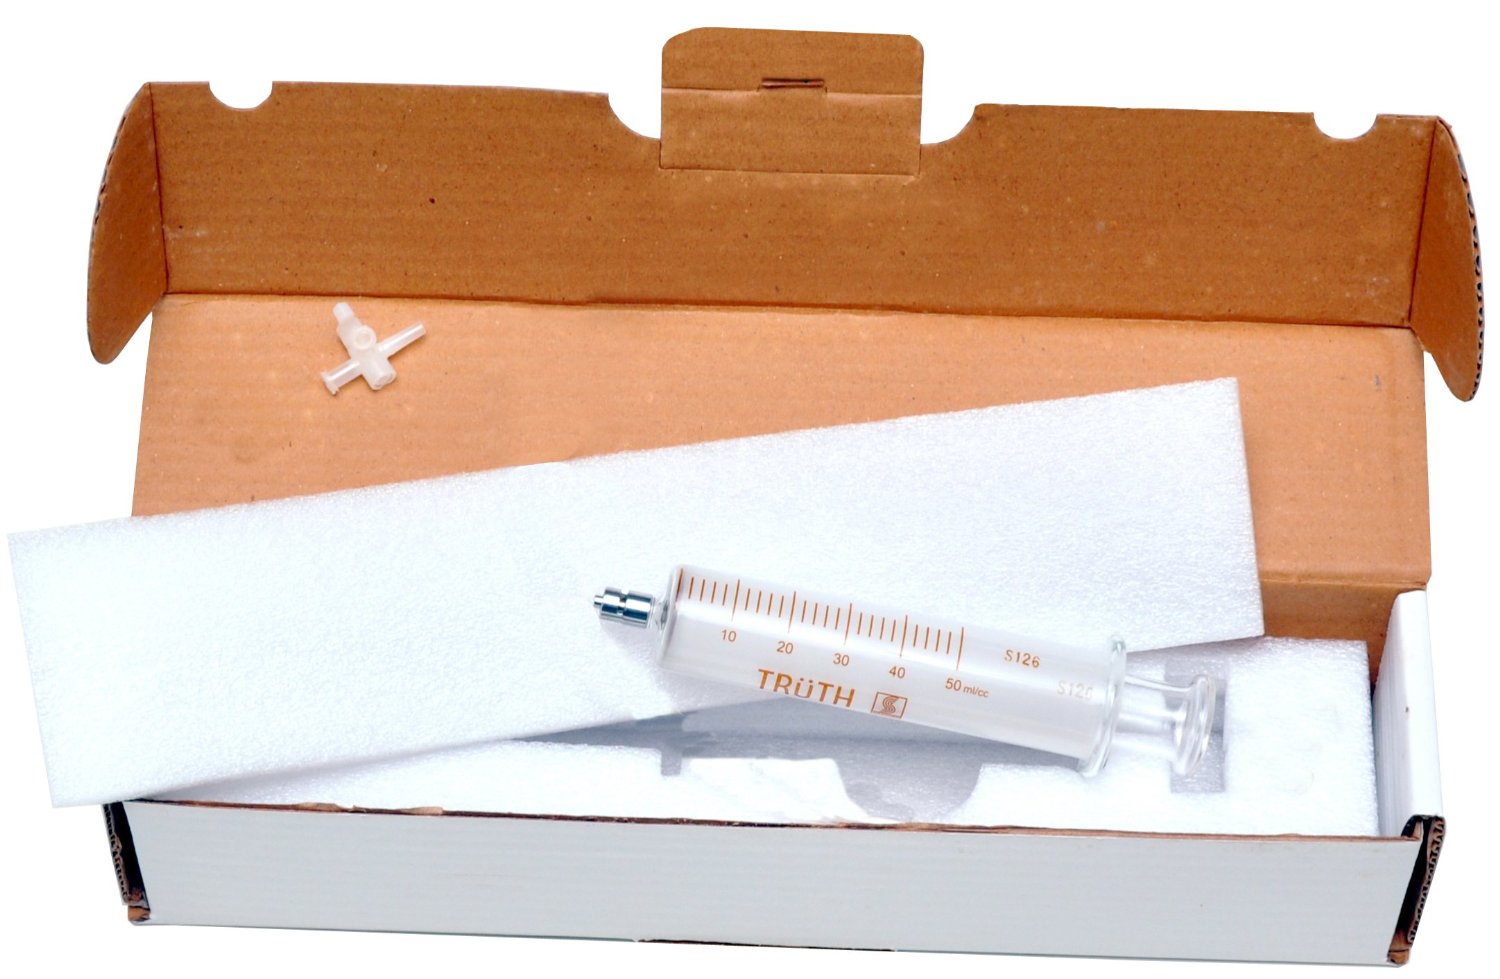 50ml DGA TRUTH Glass Syringe - 3 Way Stopcock - Padded Carrying Case